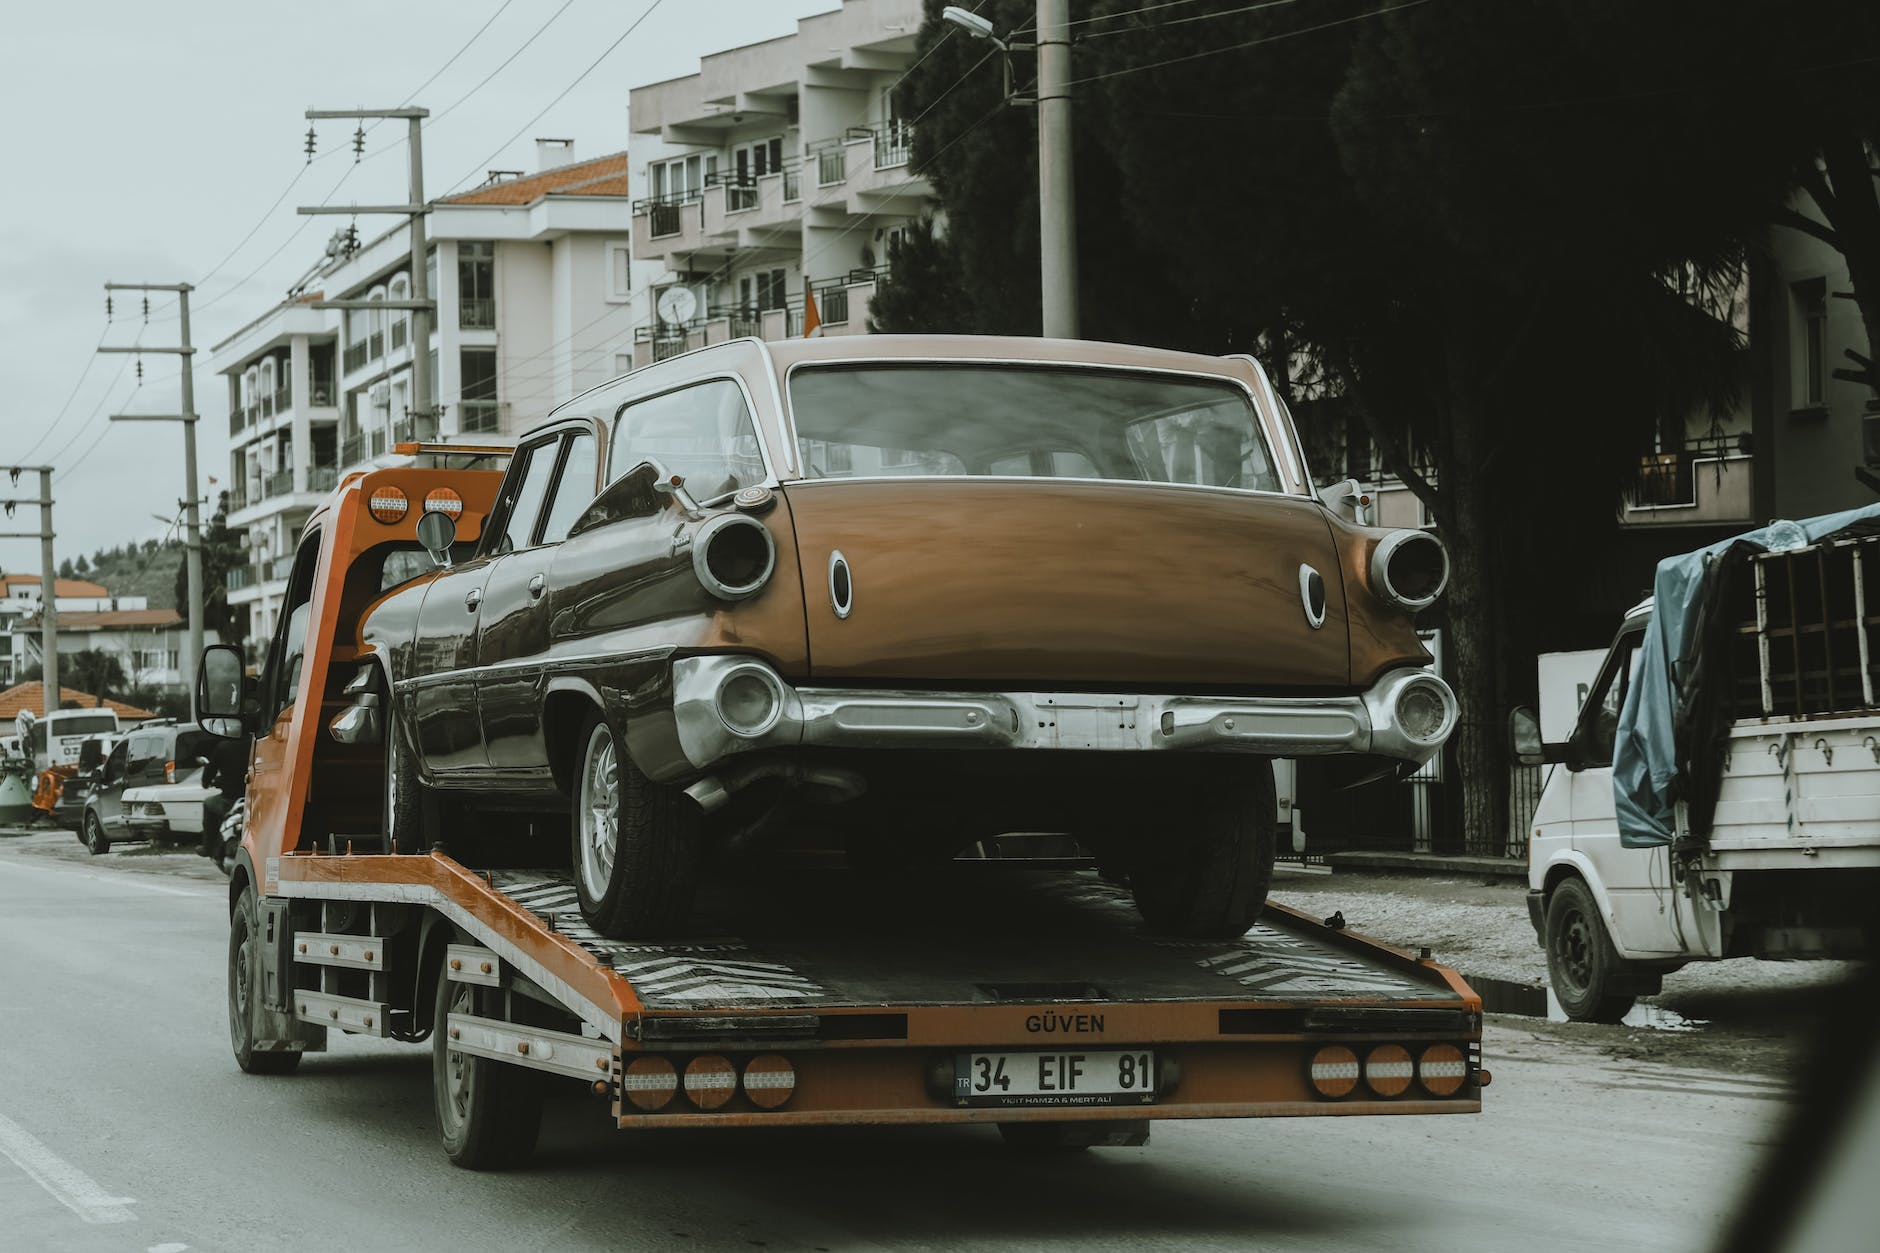 understanding the costs: tow truck services in dublin